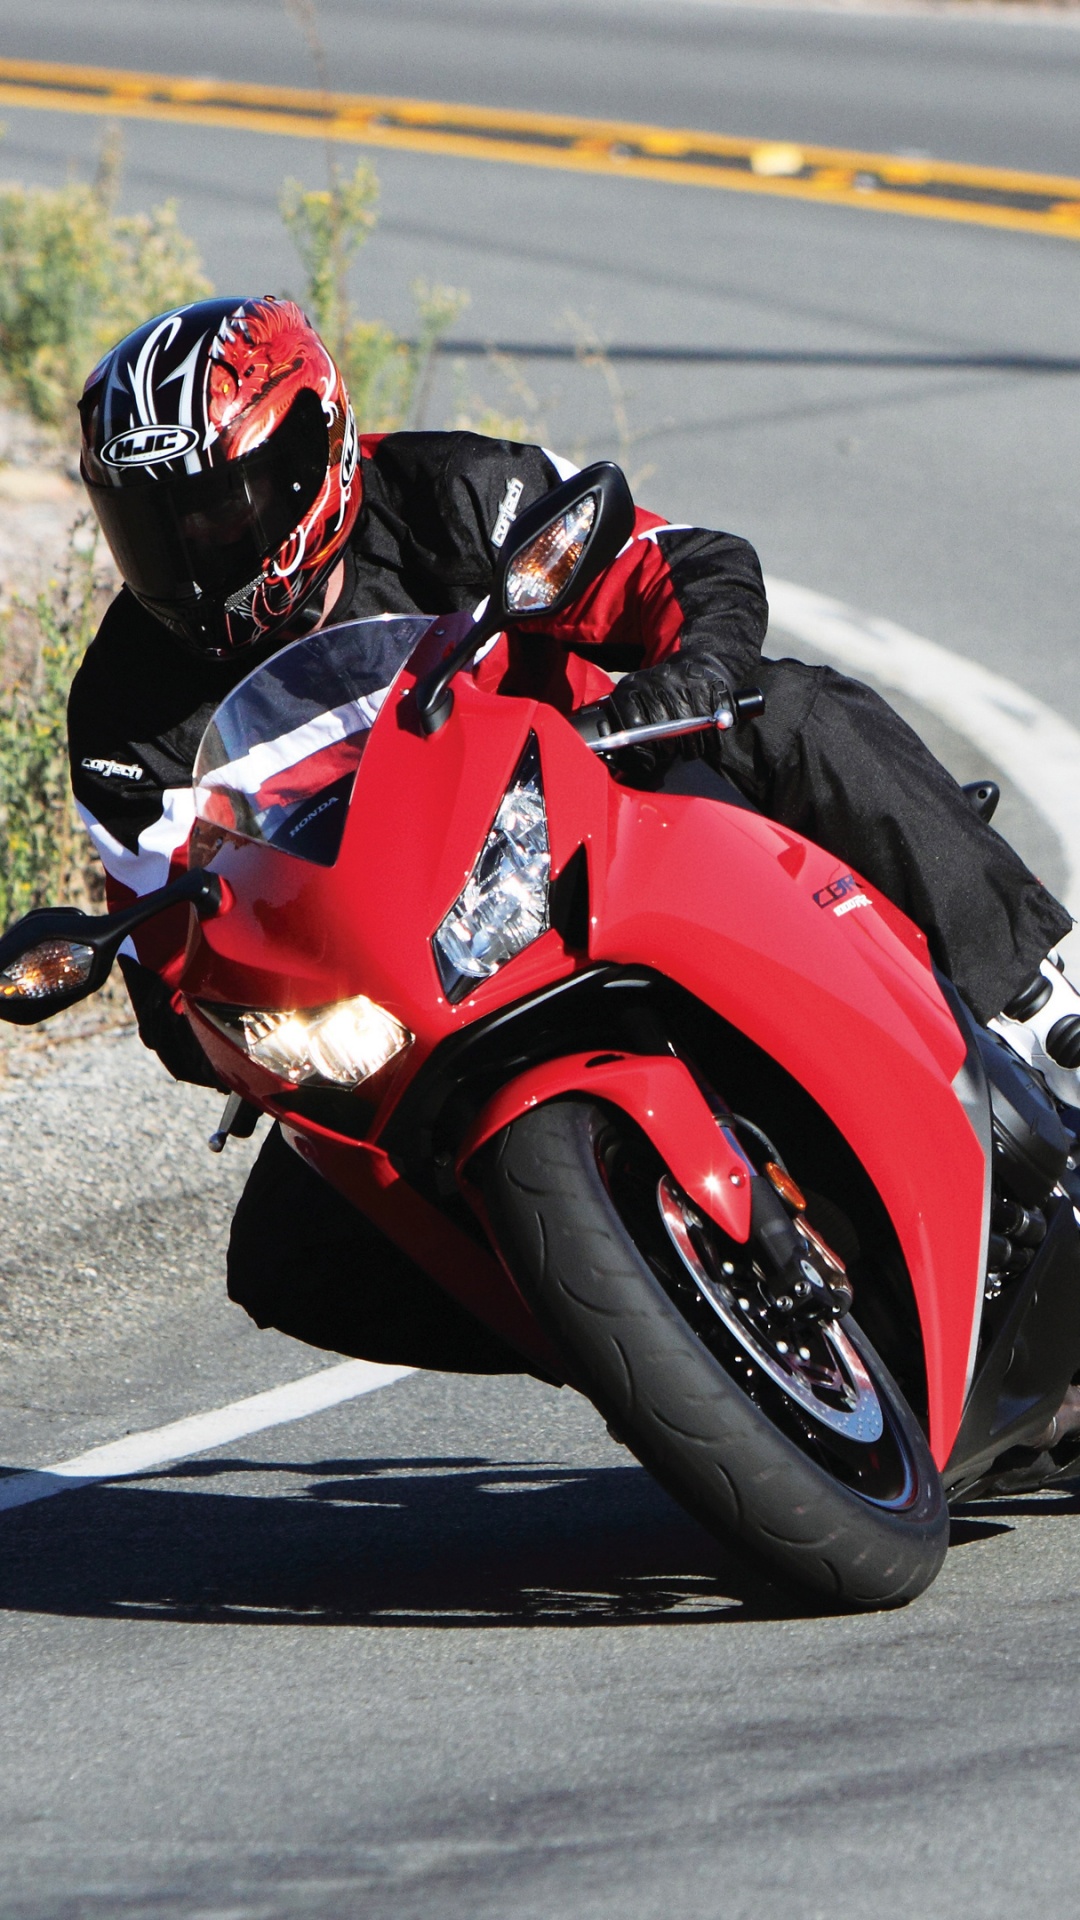 Man in Red and Black Sports Shirt Riding Red Sports Bike on Road During Daytime. Wallpaper in 1080x1920 Resolution